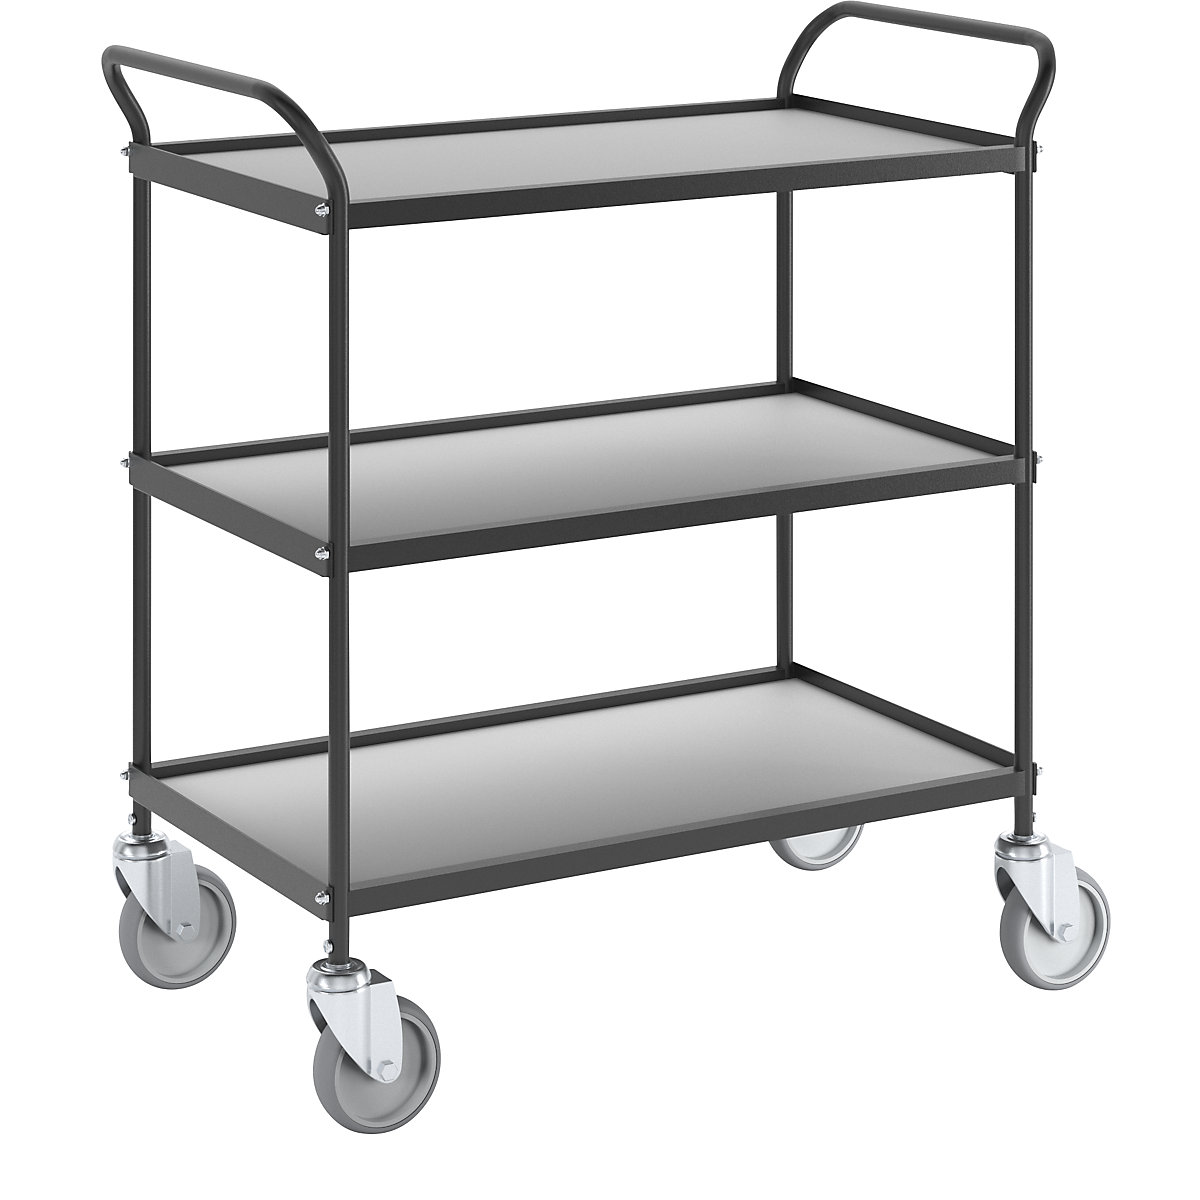 Serving trolley, LxWxH 890 x 465 x 960 mm, 3 shelves, 2+ items-2